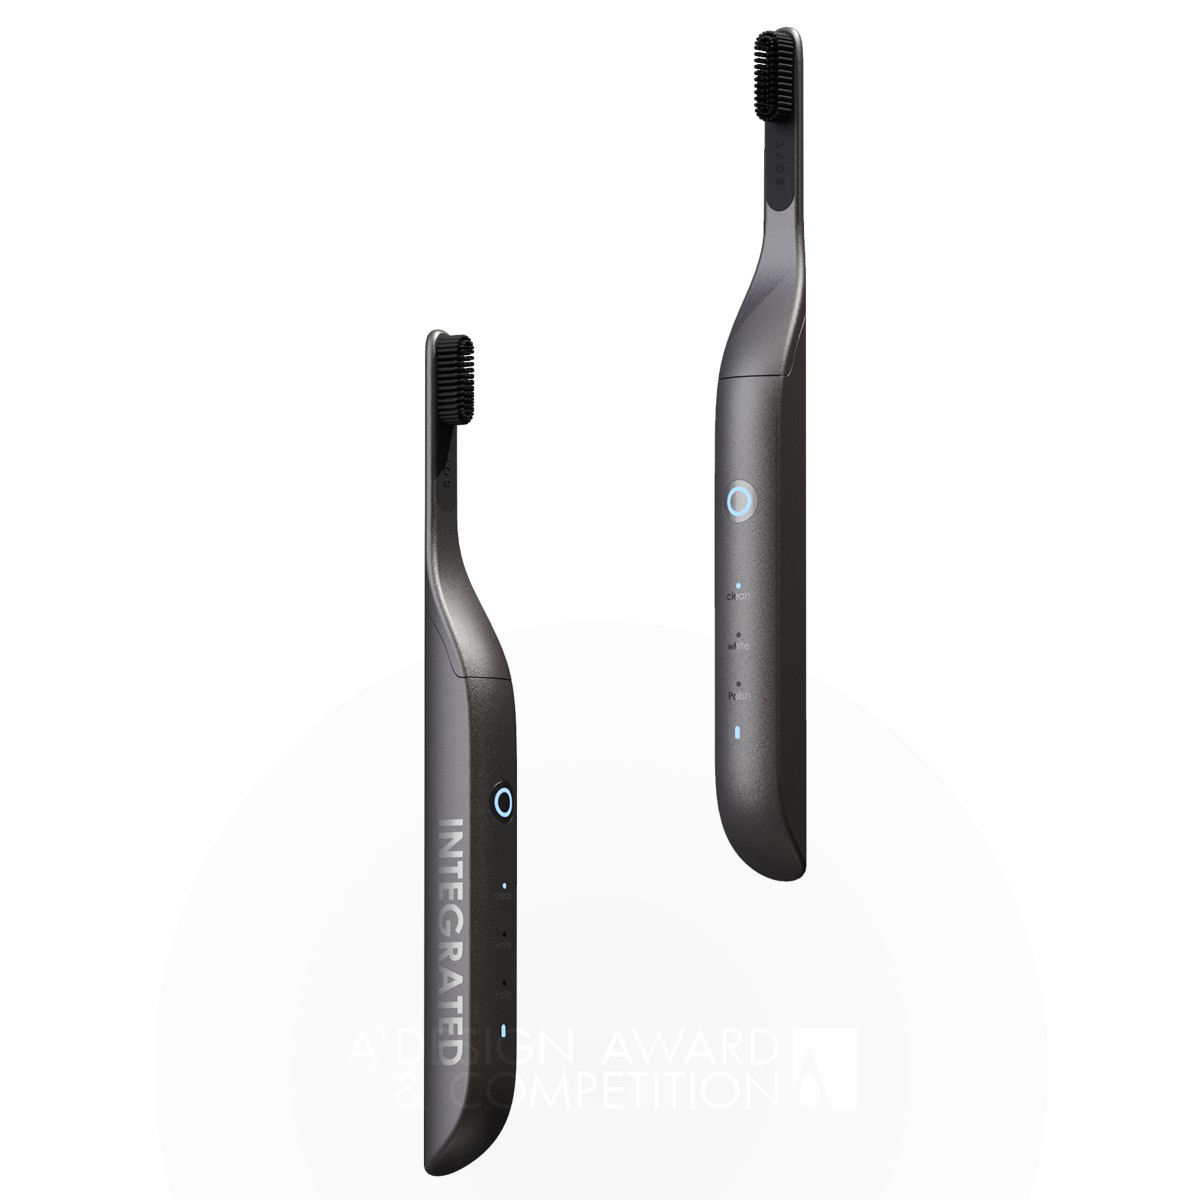 Isotopetc Electric Toothbrush